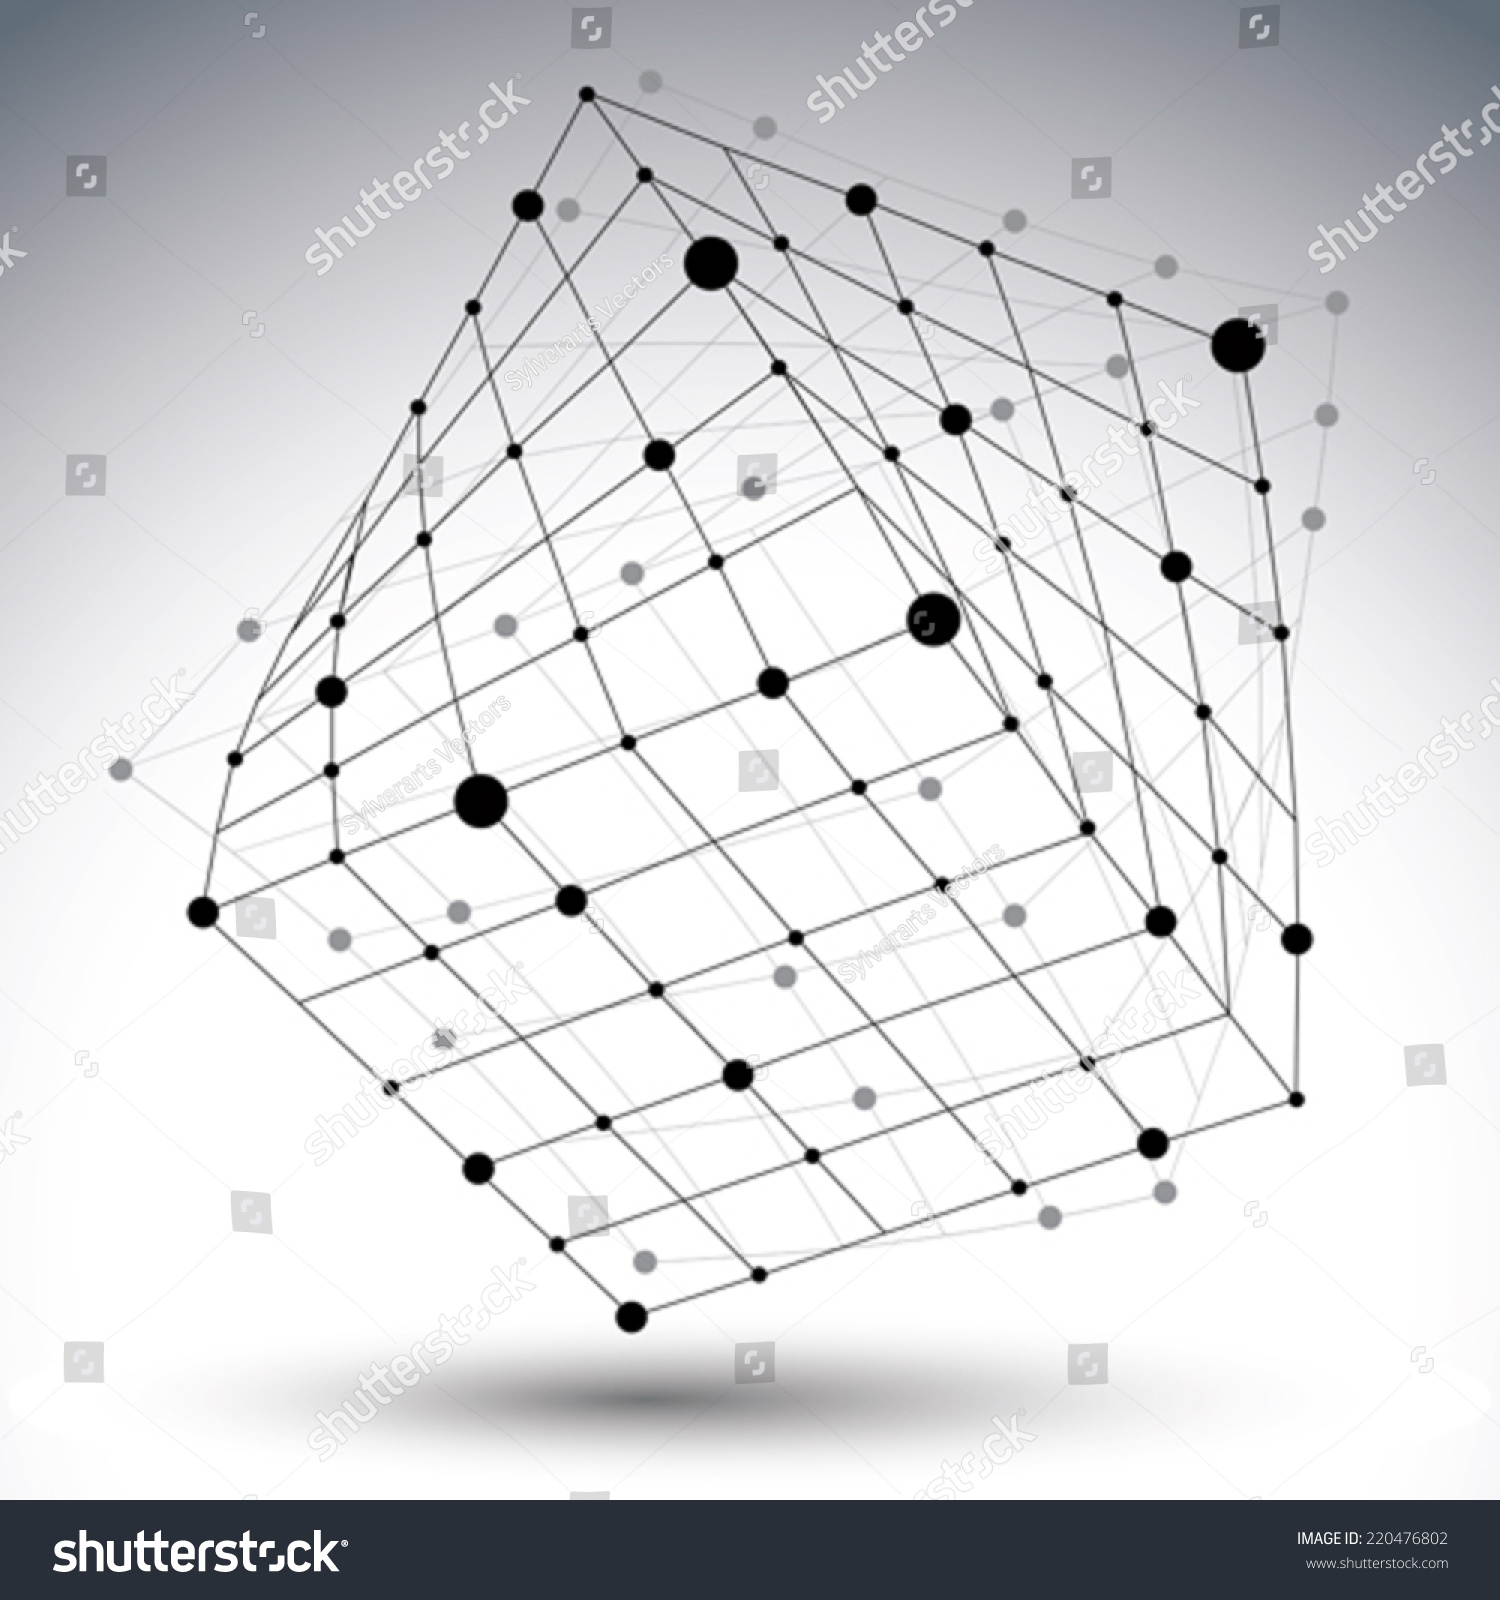 Abstract 3d Structure Polygonal Vector Network Stock Vector HD ...